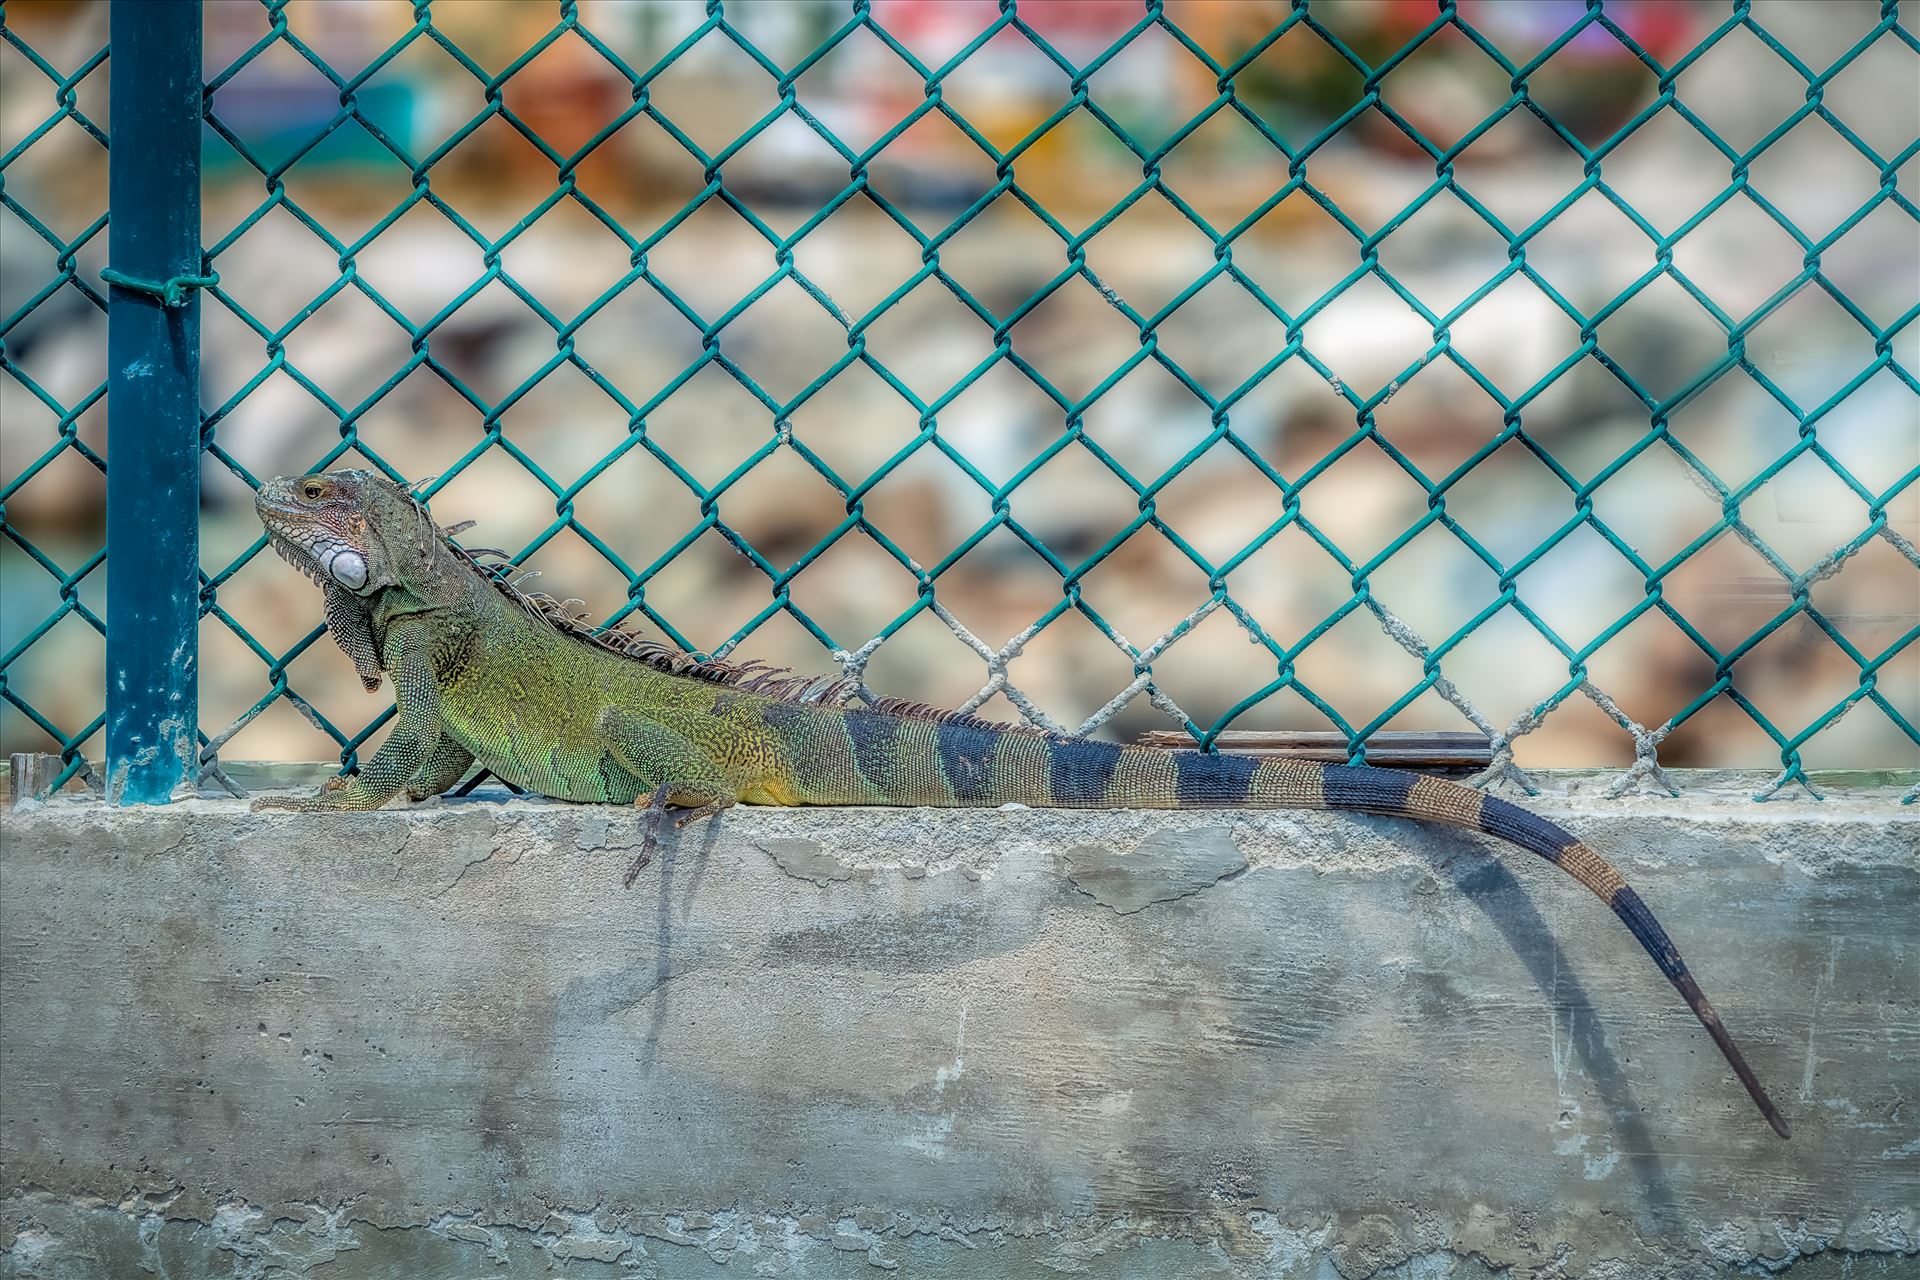 Iguana - Iguana sitting on concrete next to green chainlink fence by Terry Kelly Photography